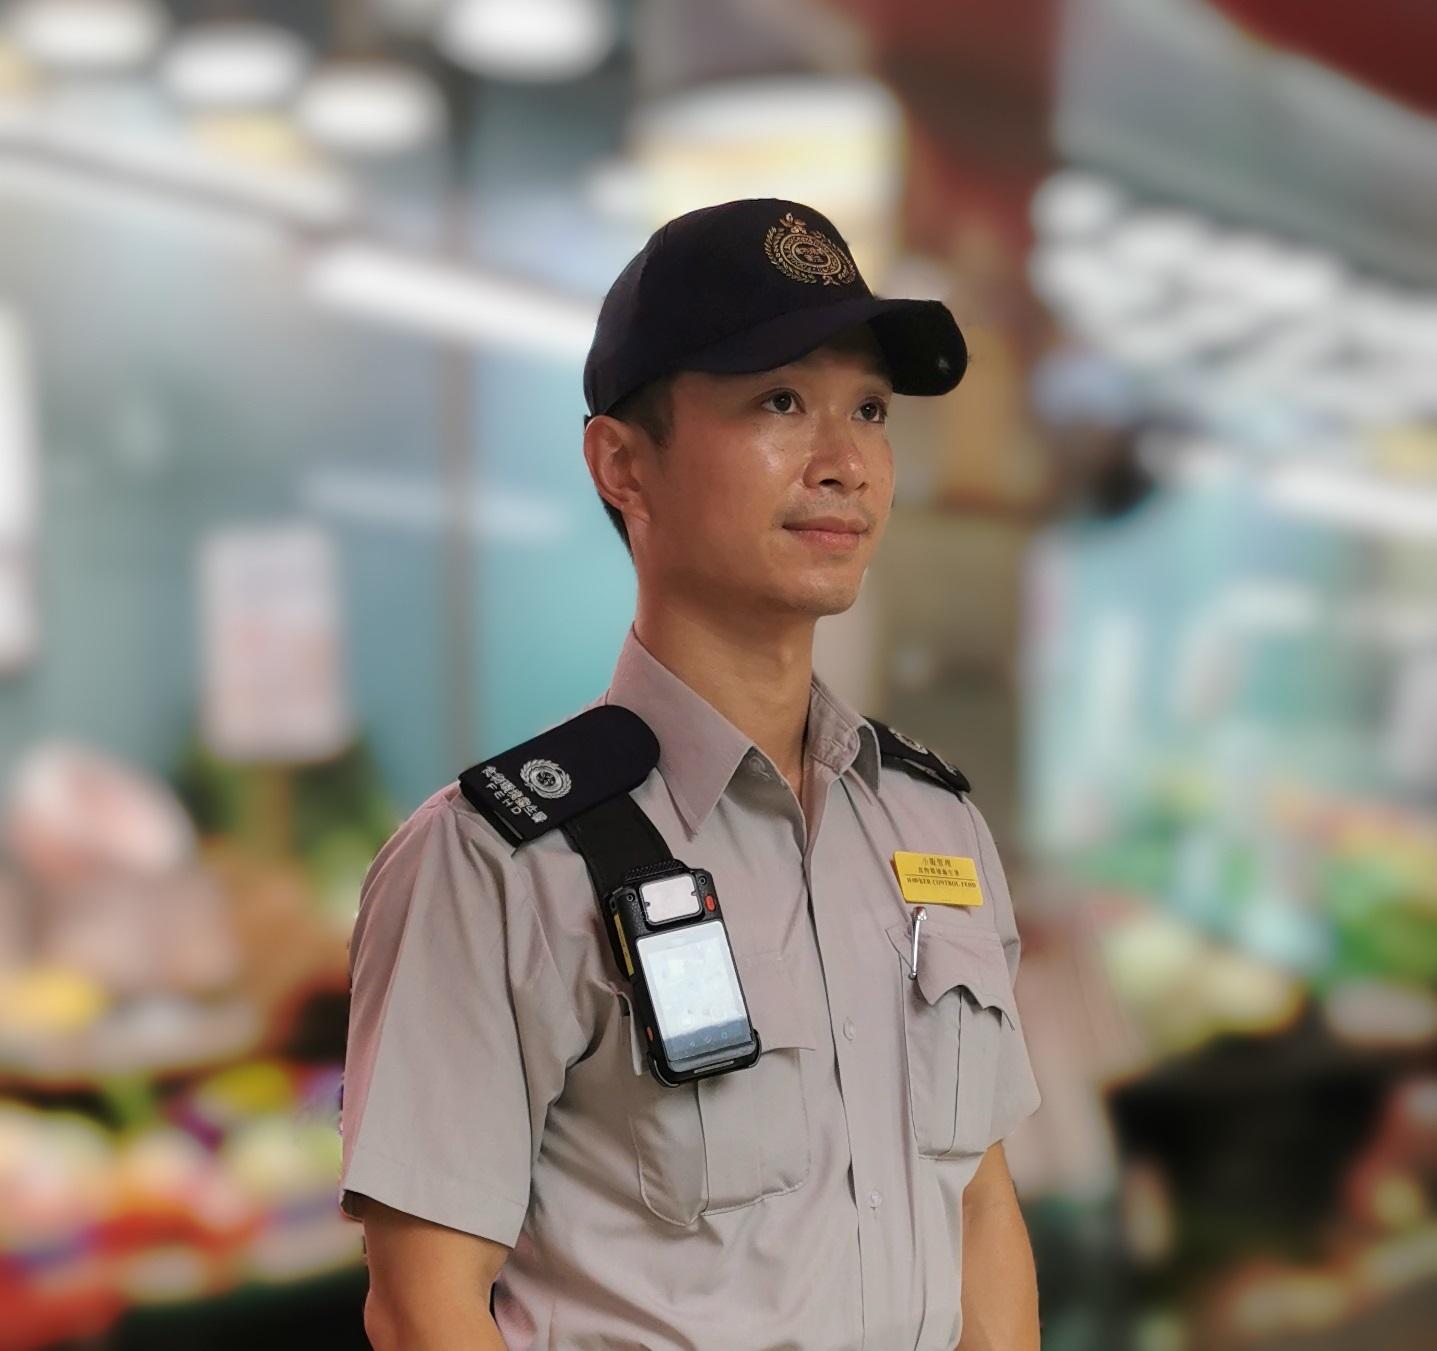 A spokesperson for the Food and Environmental Hygiene Department said today (July 2) that in order to assist frontline staff in carrying out their duties more effectively and safeguard the safety of the public and staff, District Hawker Control Teams under the department will gradually start using Body Worn Video Cameras from tomorrow onwards based on actual needs and circumstances.